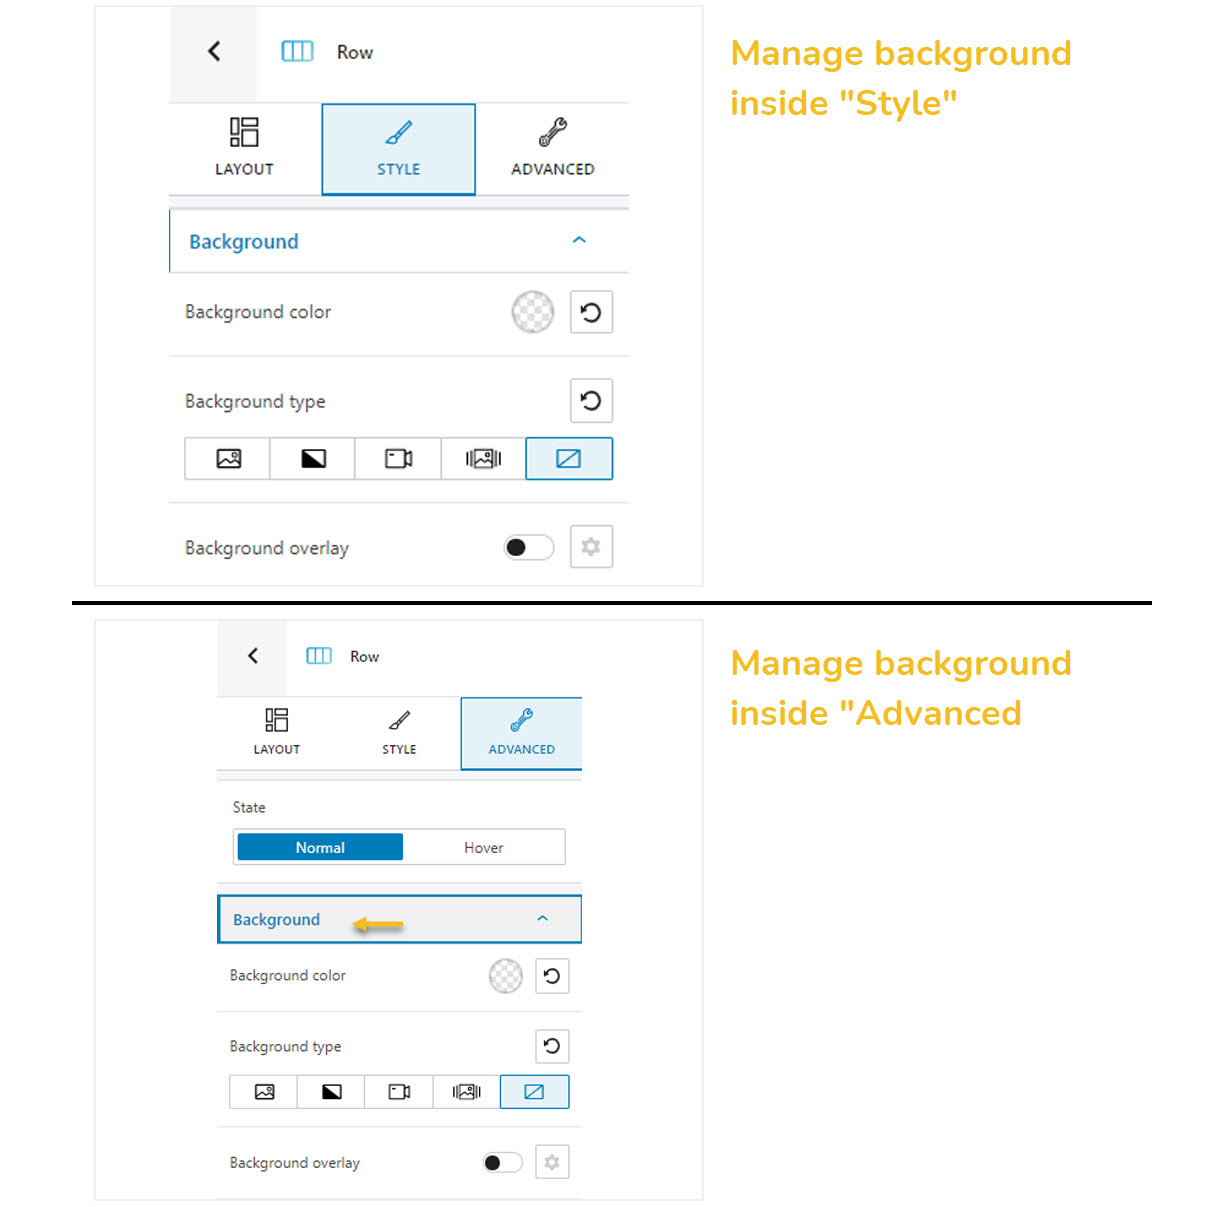 Managing backgrounds inside Style and Advanced